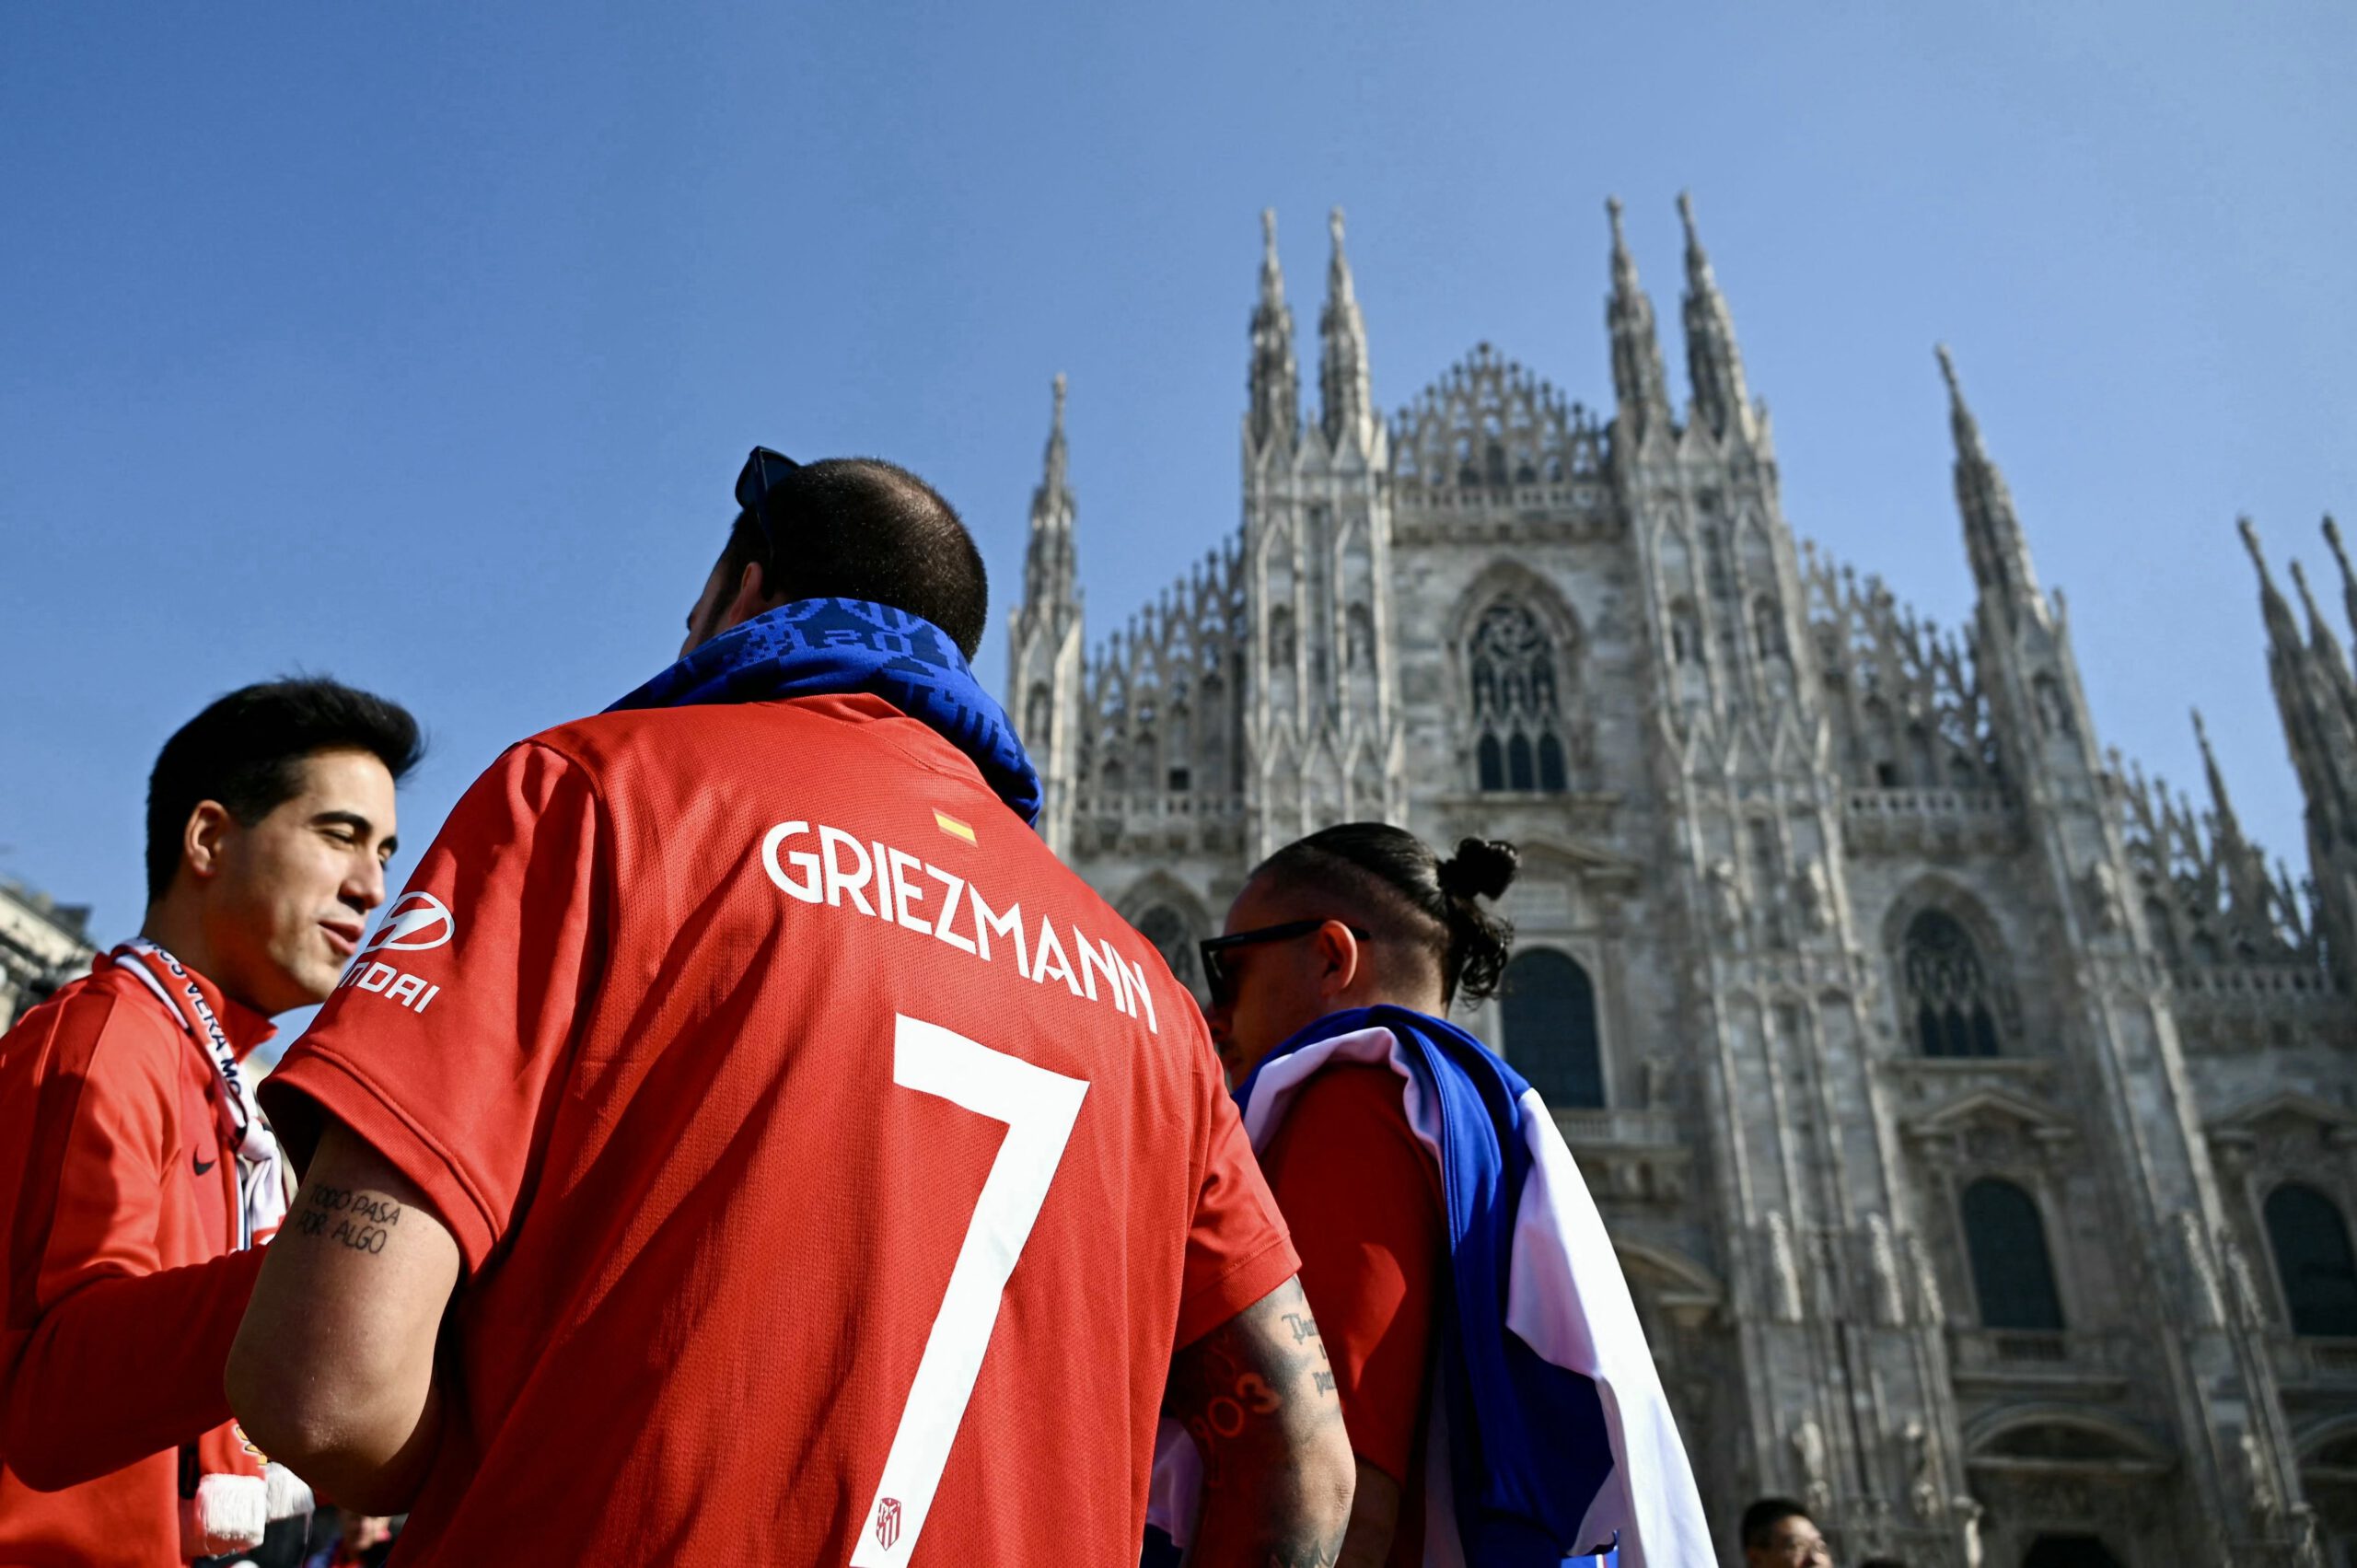 Atletico Madrid's supporters are seen at Piazza Duomo in Milan